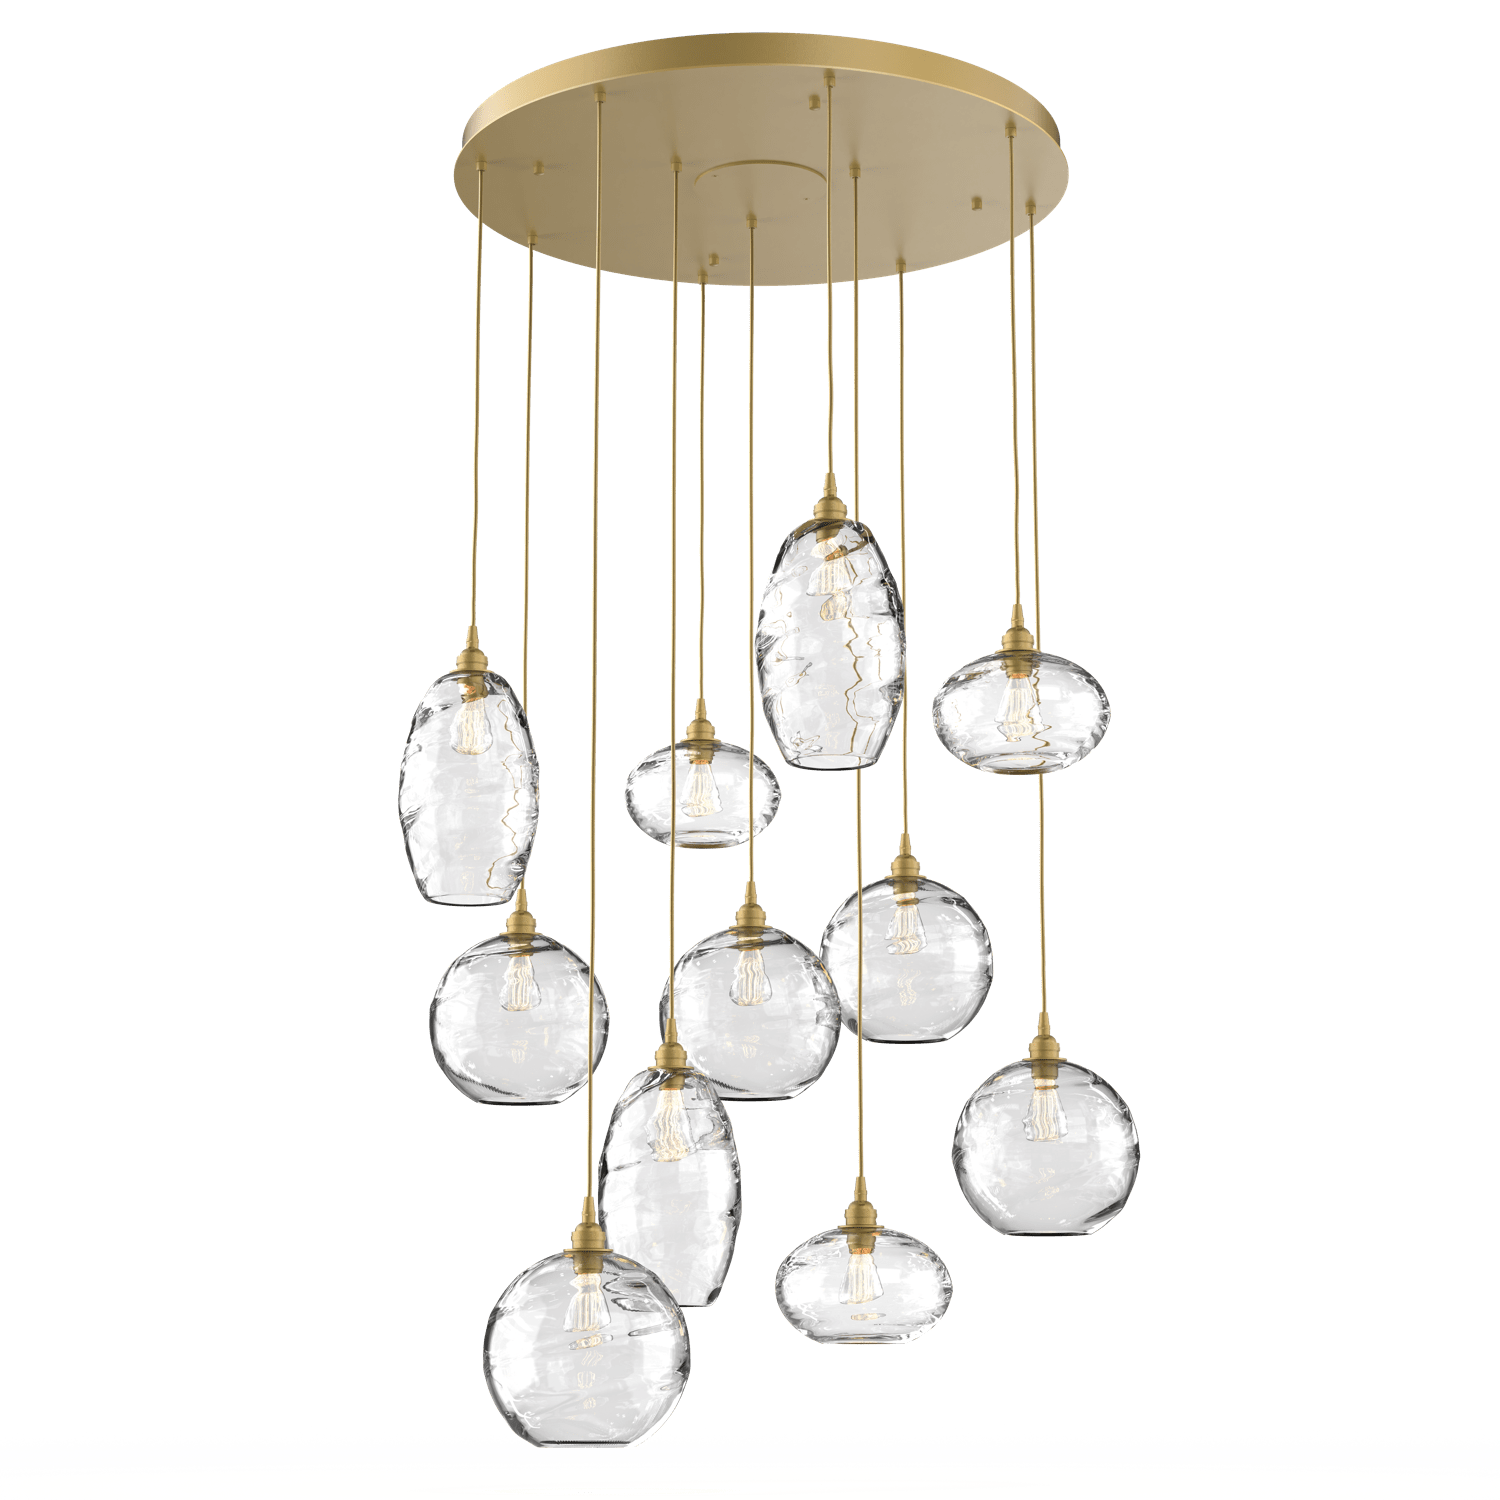 CHB0048-11-GB-OC-Hammerton-Studio-Optic-Blown-Glass-Misto-11-light-round-pendant-chandelier-with-gilded-brass-finish-and-optic-clear-blown-glass-shades-and-incandescent-lamping